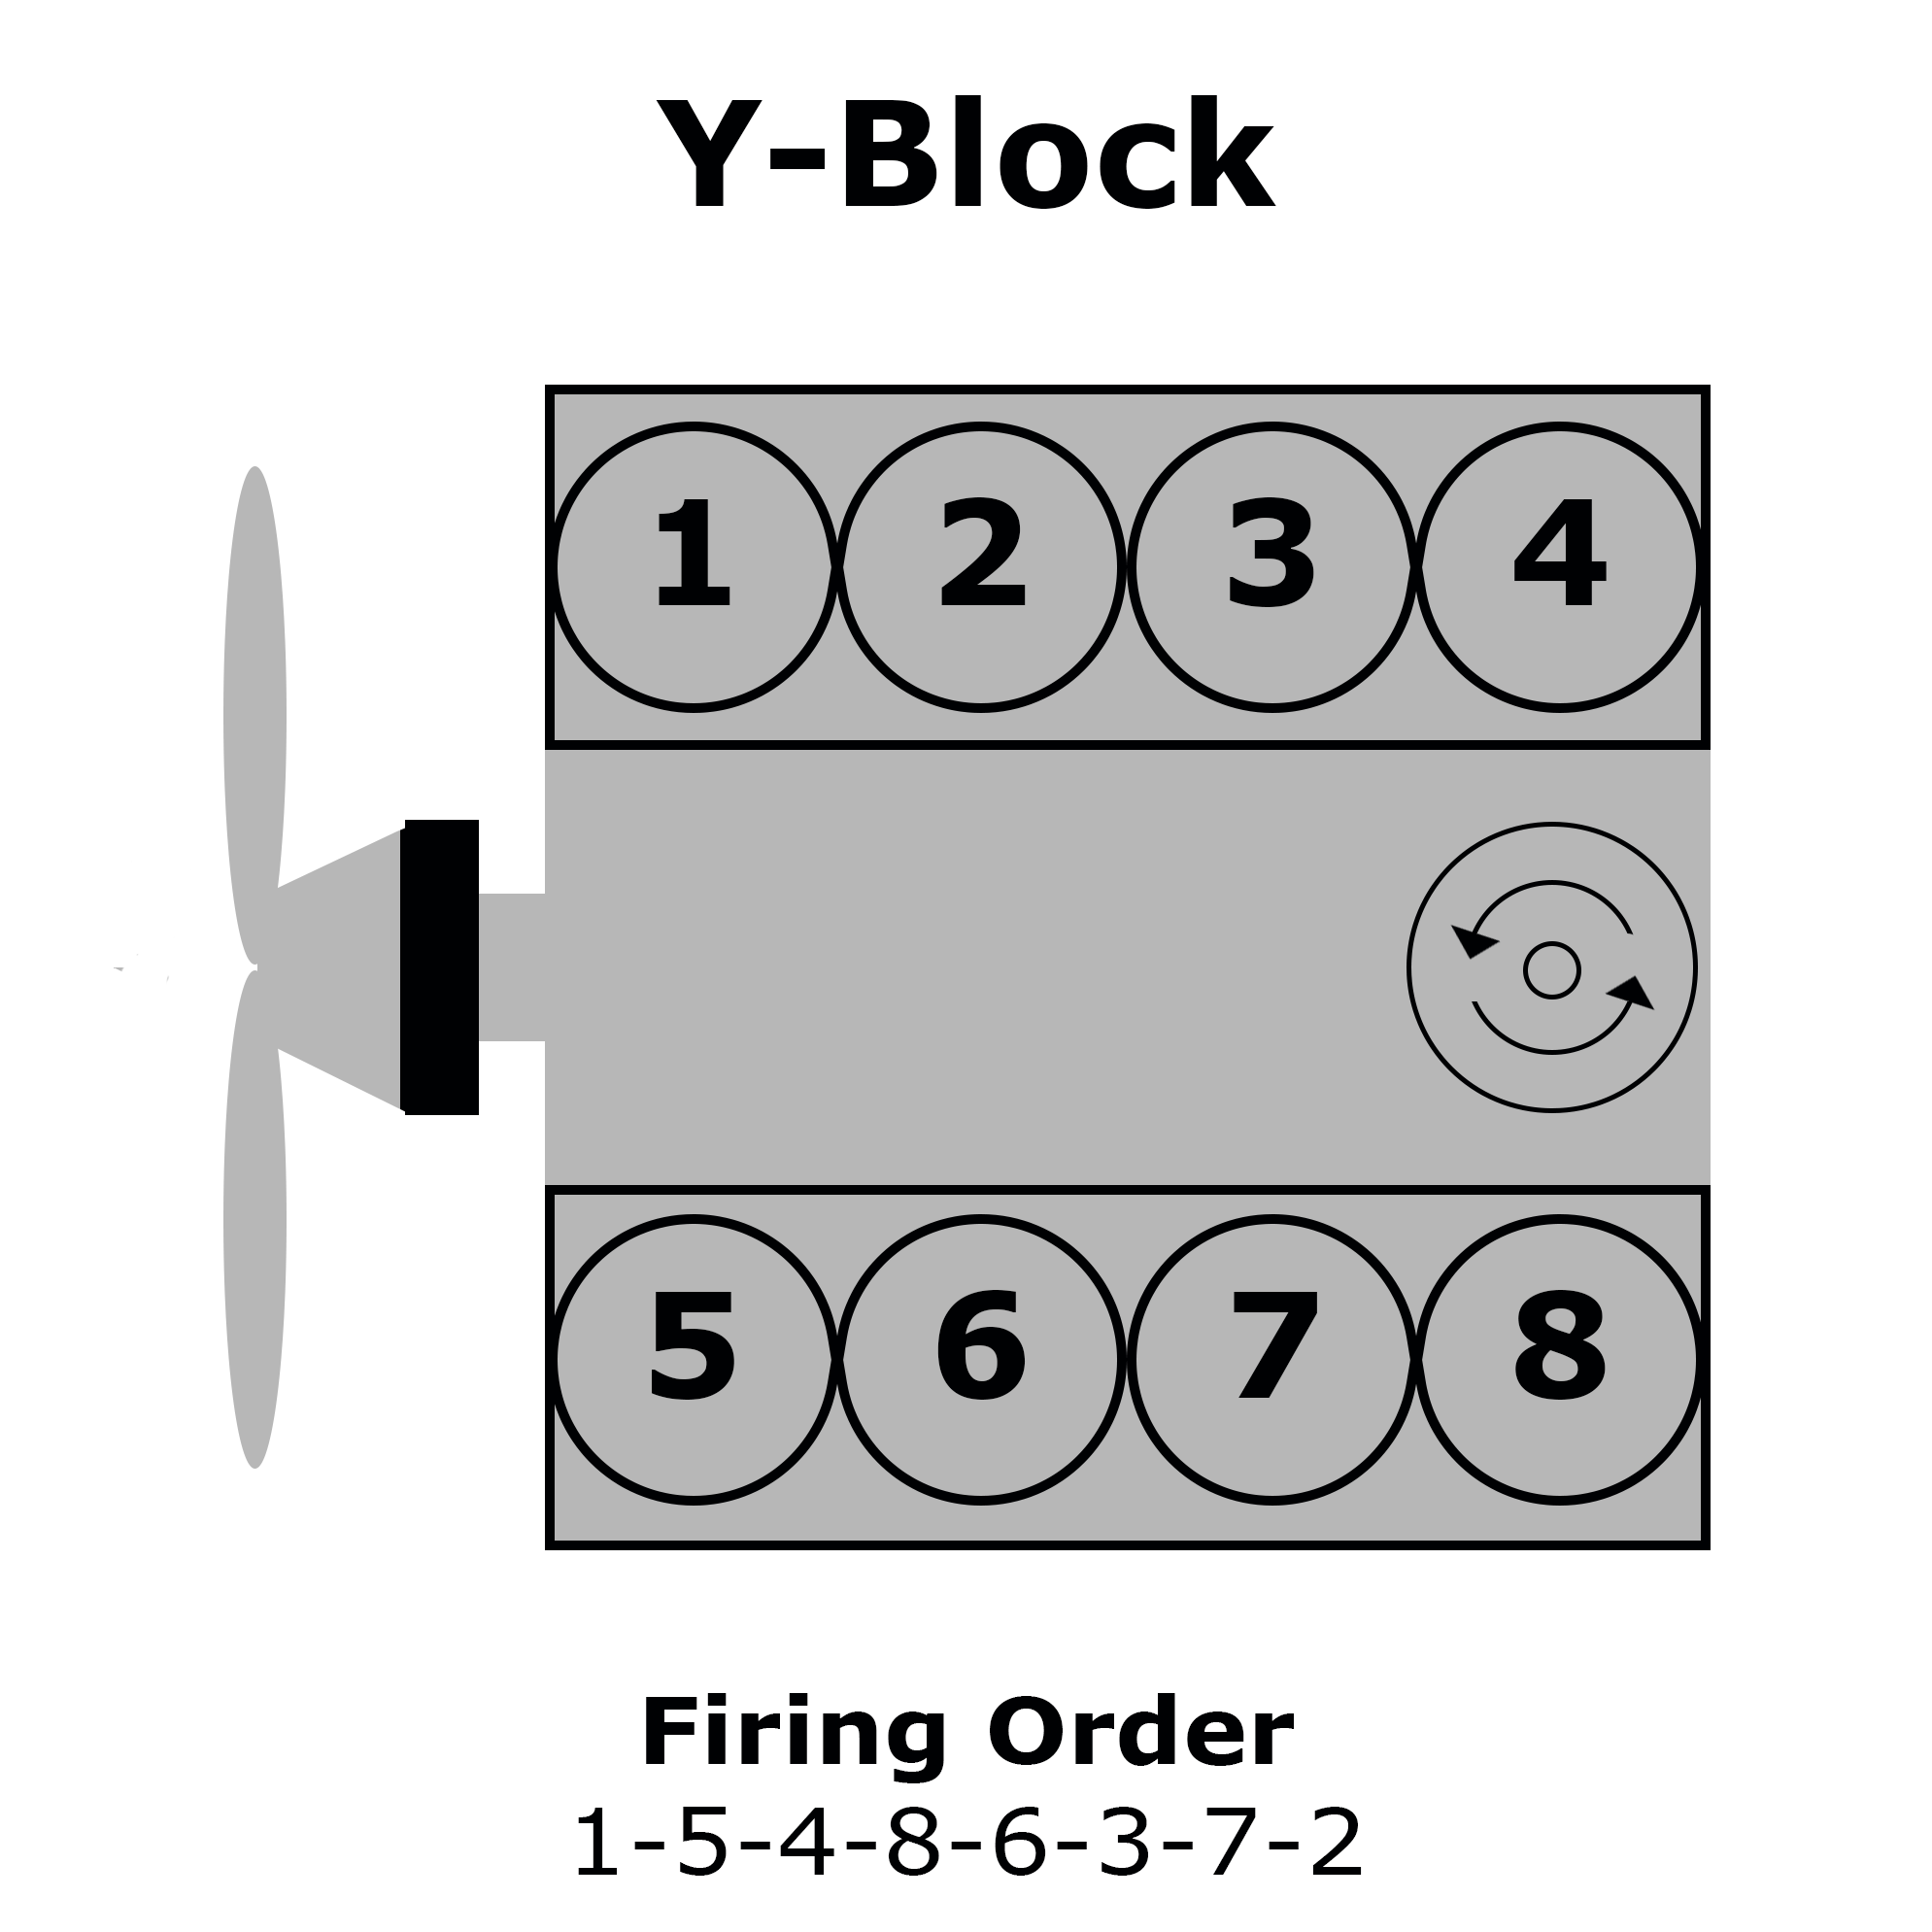 Ford Y-Block Cylinder Numbering, Distributor Rotation, and Firing Order